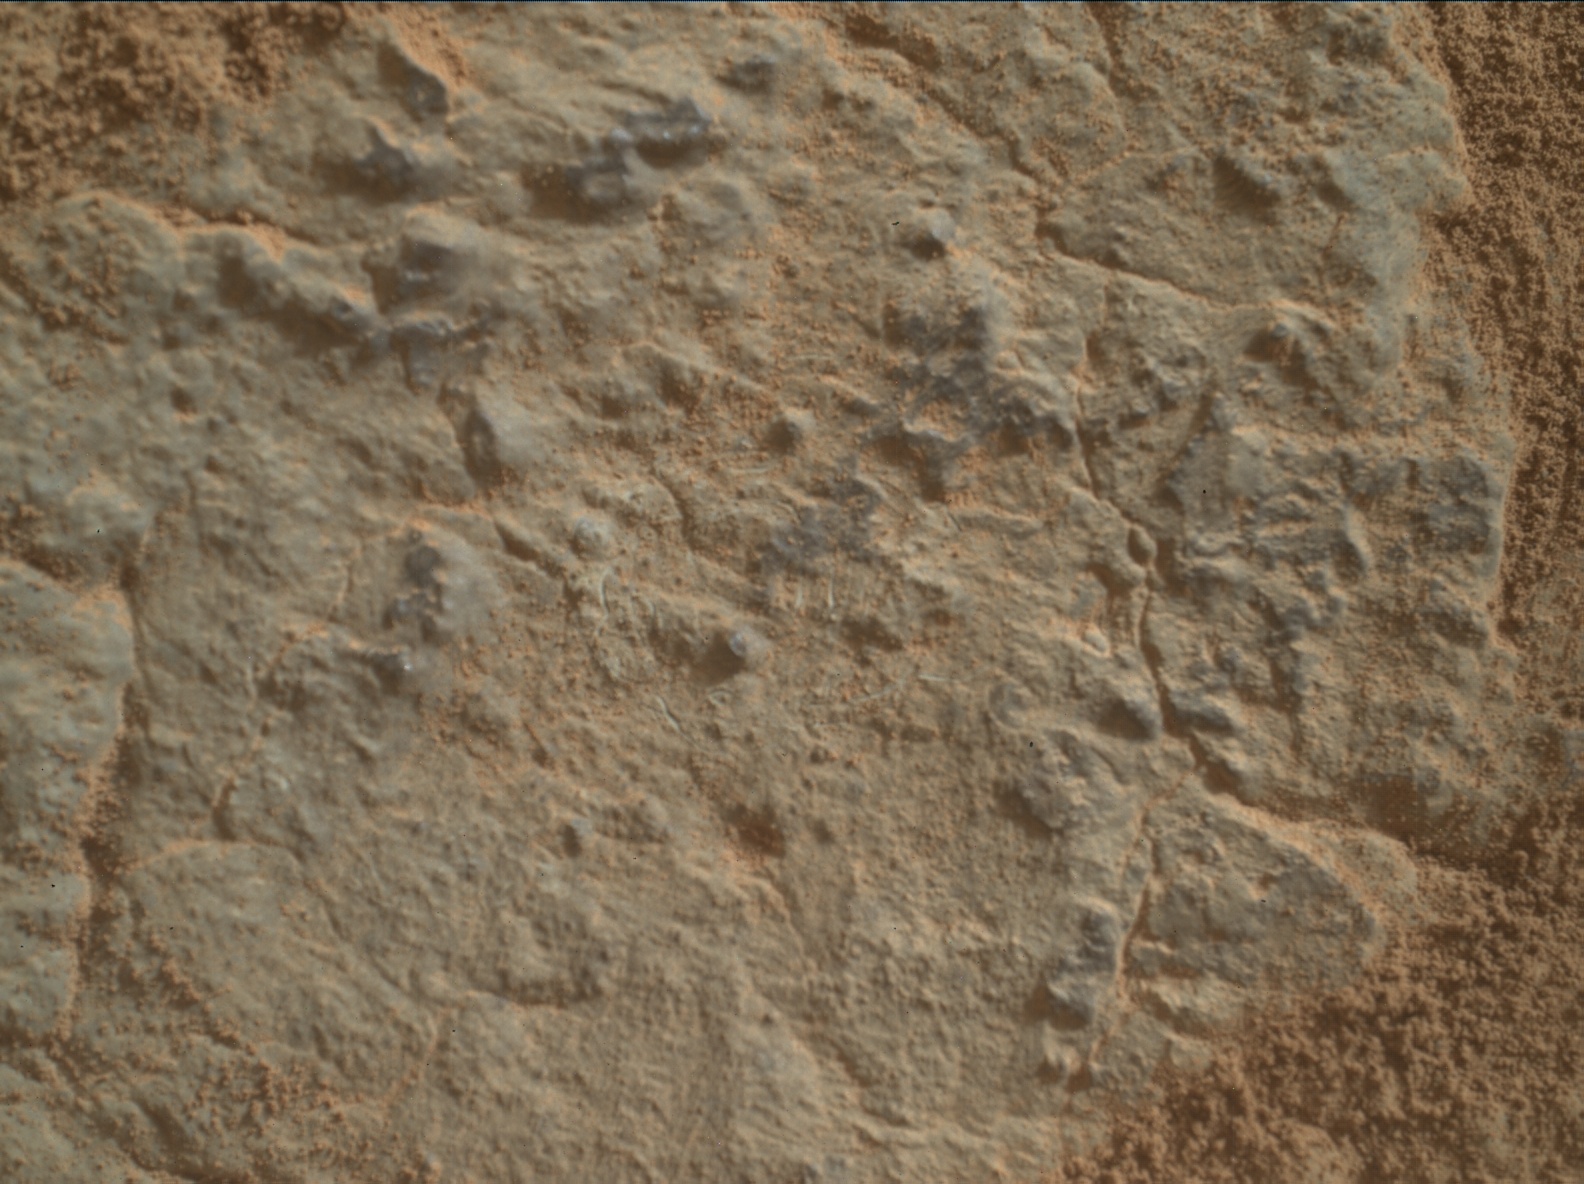 Nasa's Mars rover Curiosity acquired this image using its Mars Hand Lens Imager (MAHLI) on Sol 3451